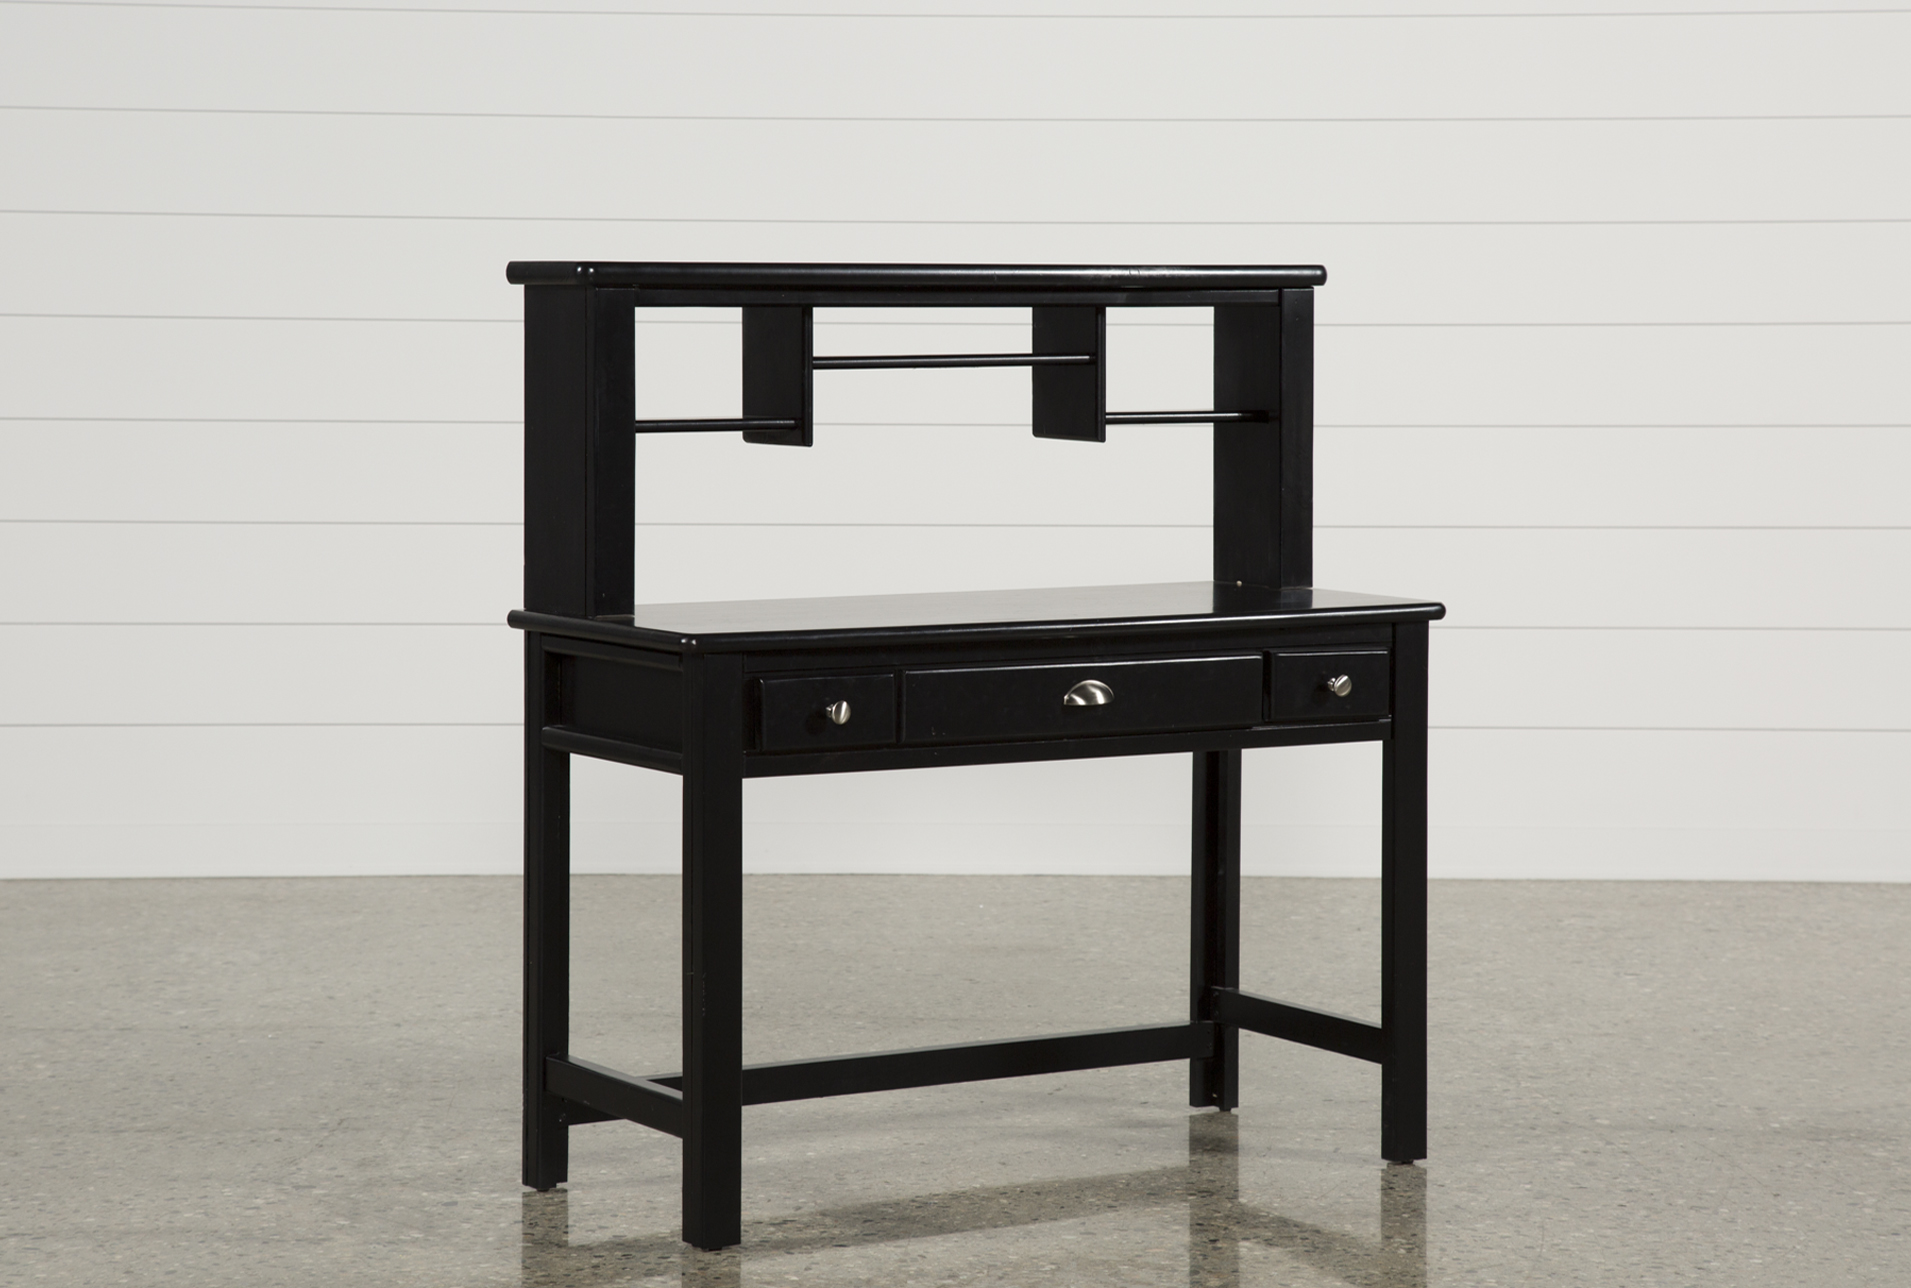 summit black desk/hutch (qty: 1) has been successfully added to your FCRHXRY